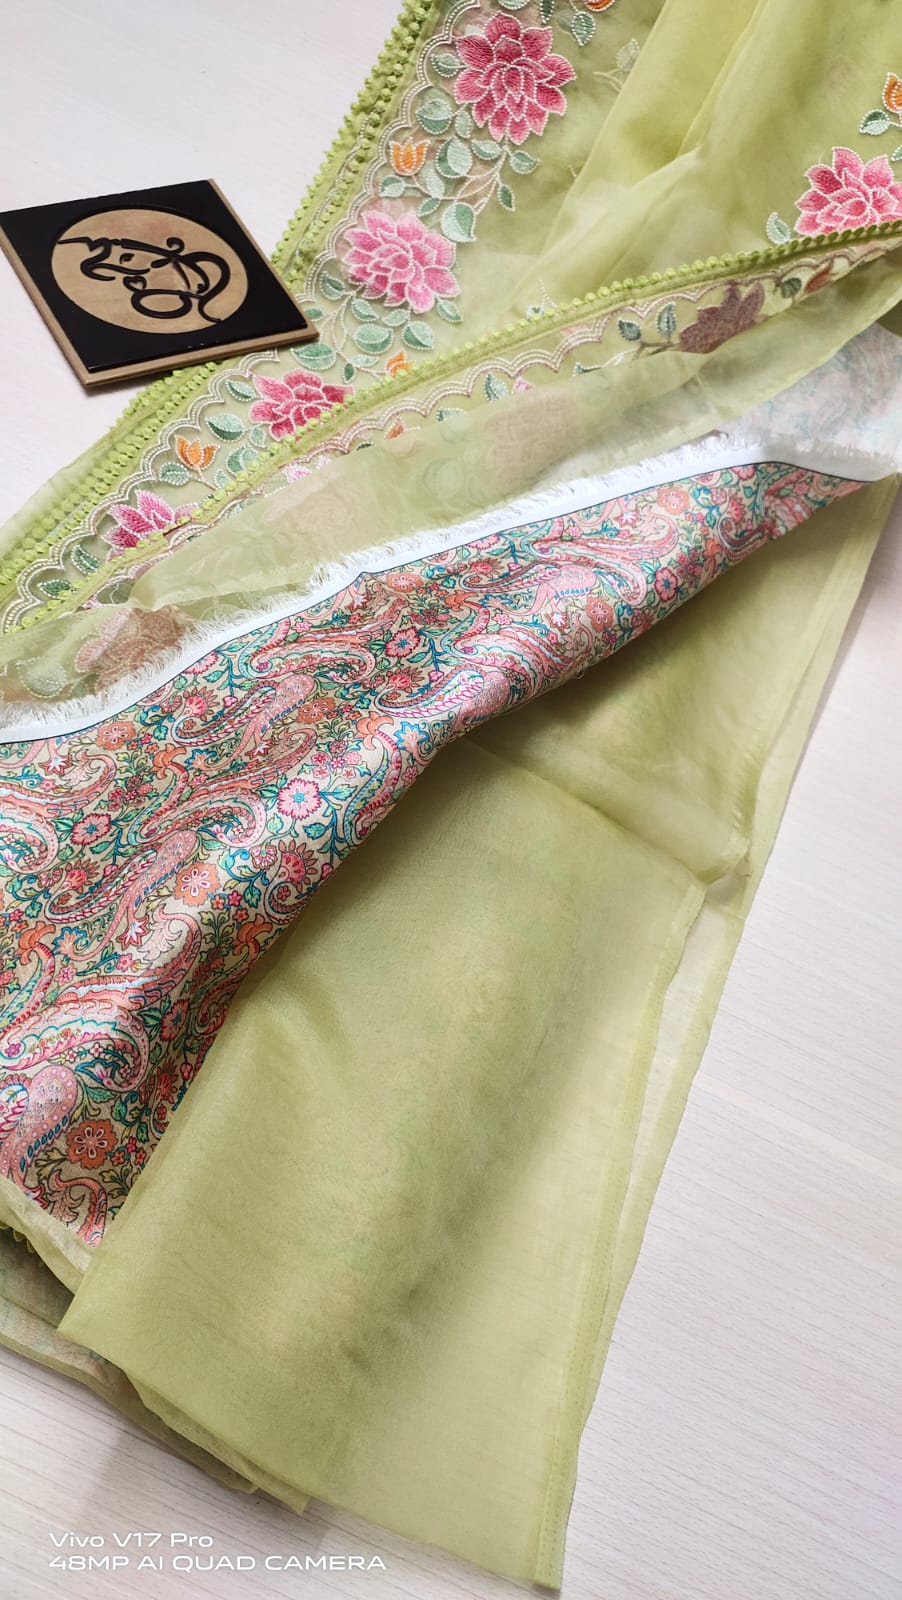 Pure beneras organza with beautiful work all over saree.